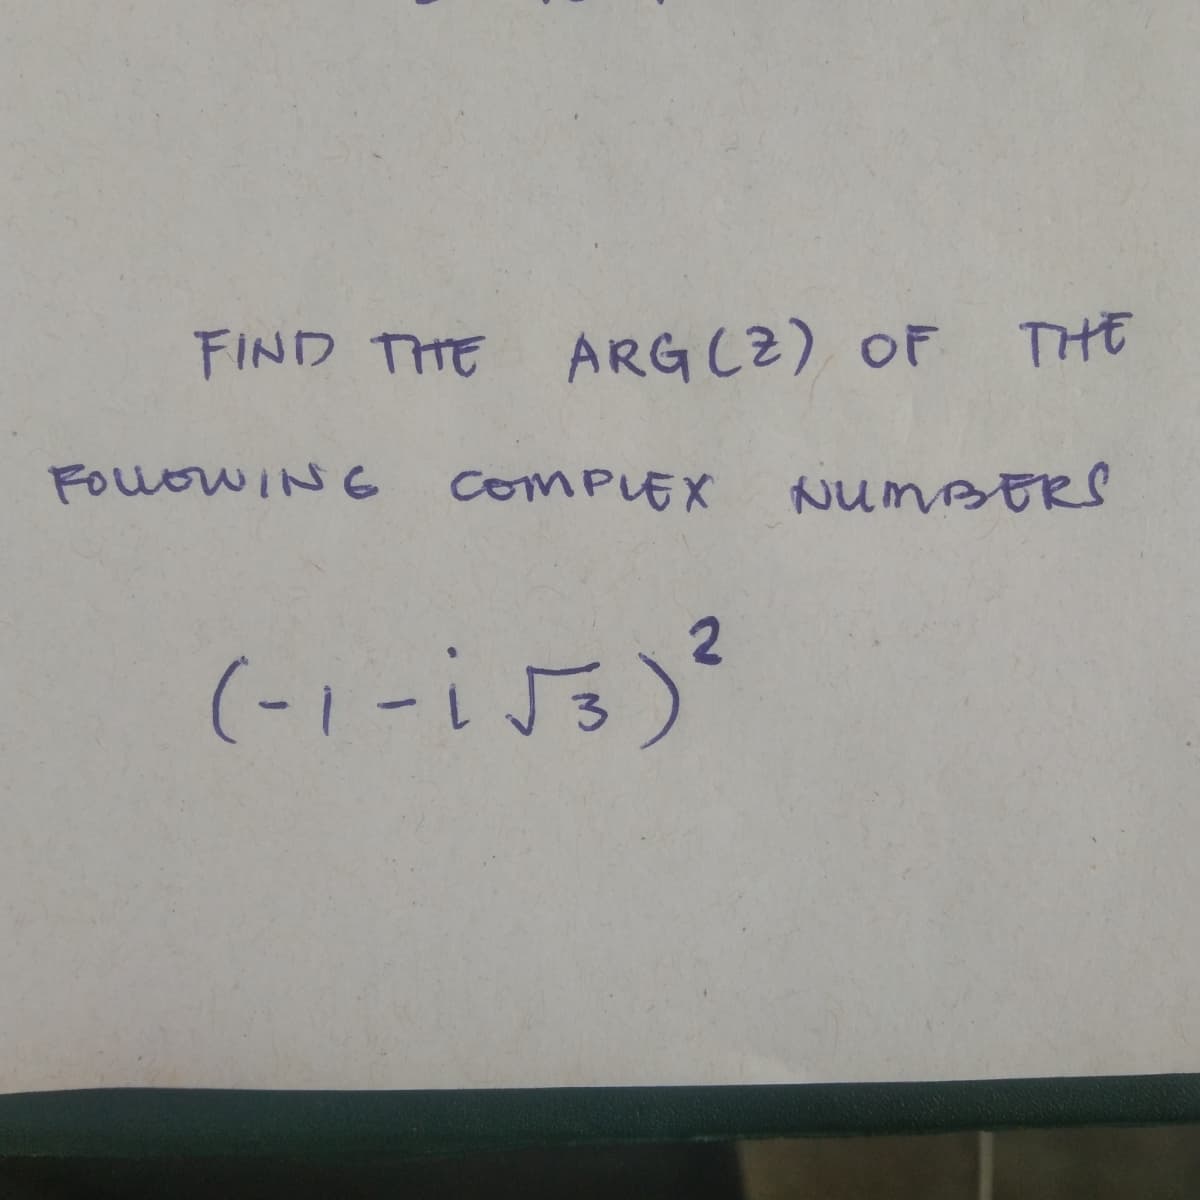 FIND THE ARG (Z) OF
THE
FOUOWING
COMPLEX NUMBERS
(-1-i Js)?
